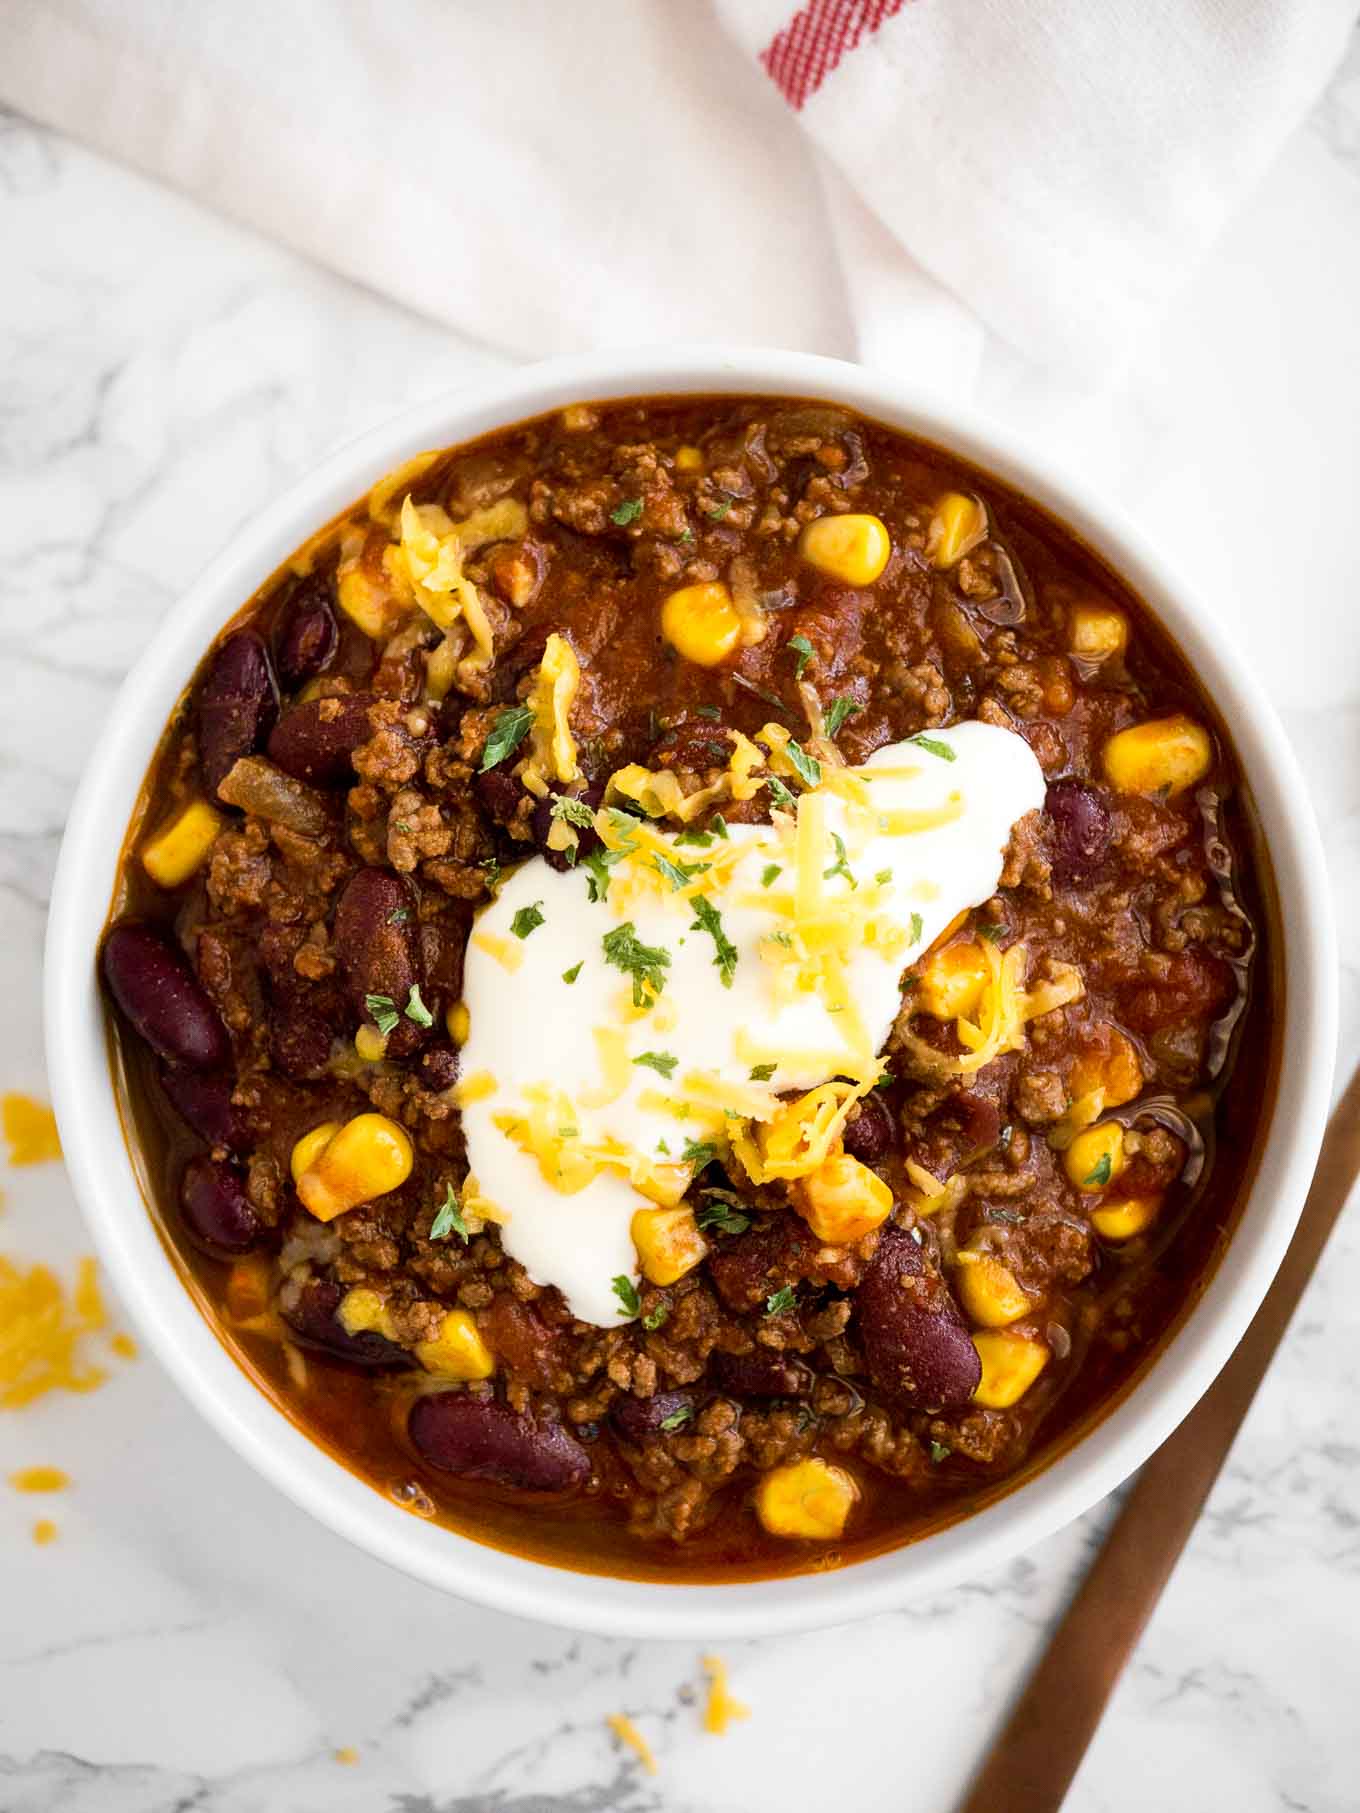 Instant Pot Chili from platedcravings.com on foodiecrush.com